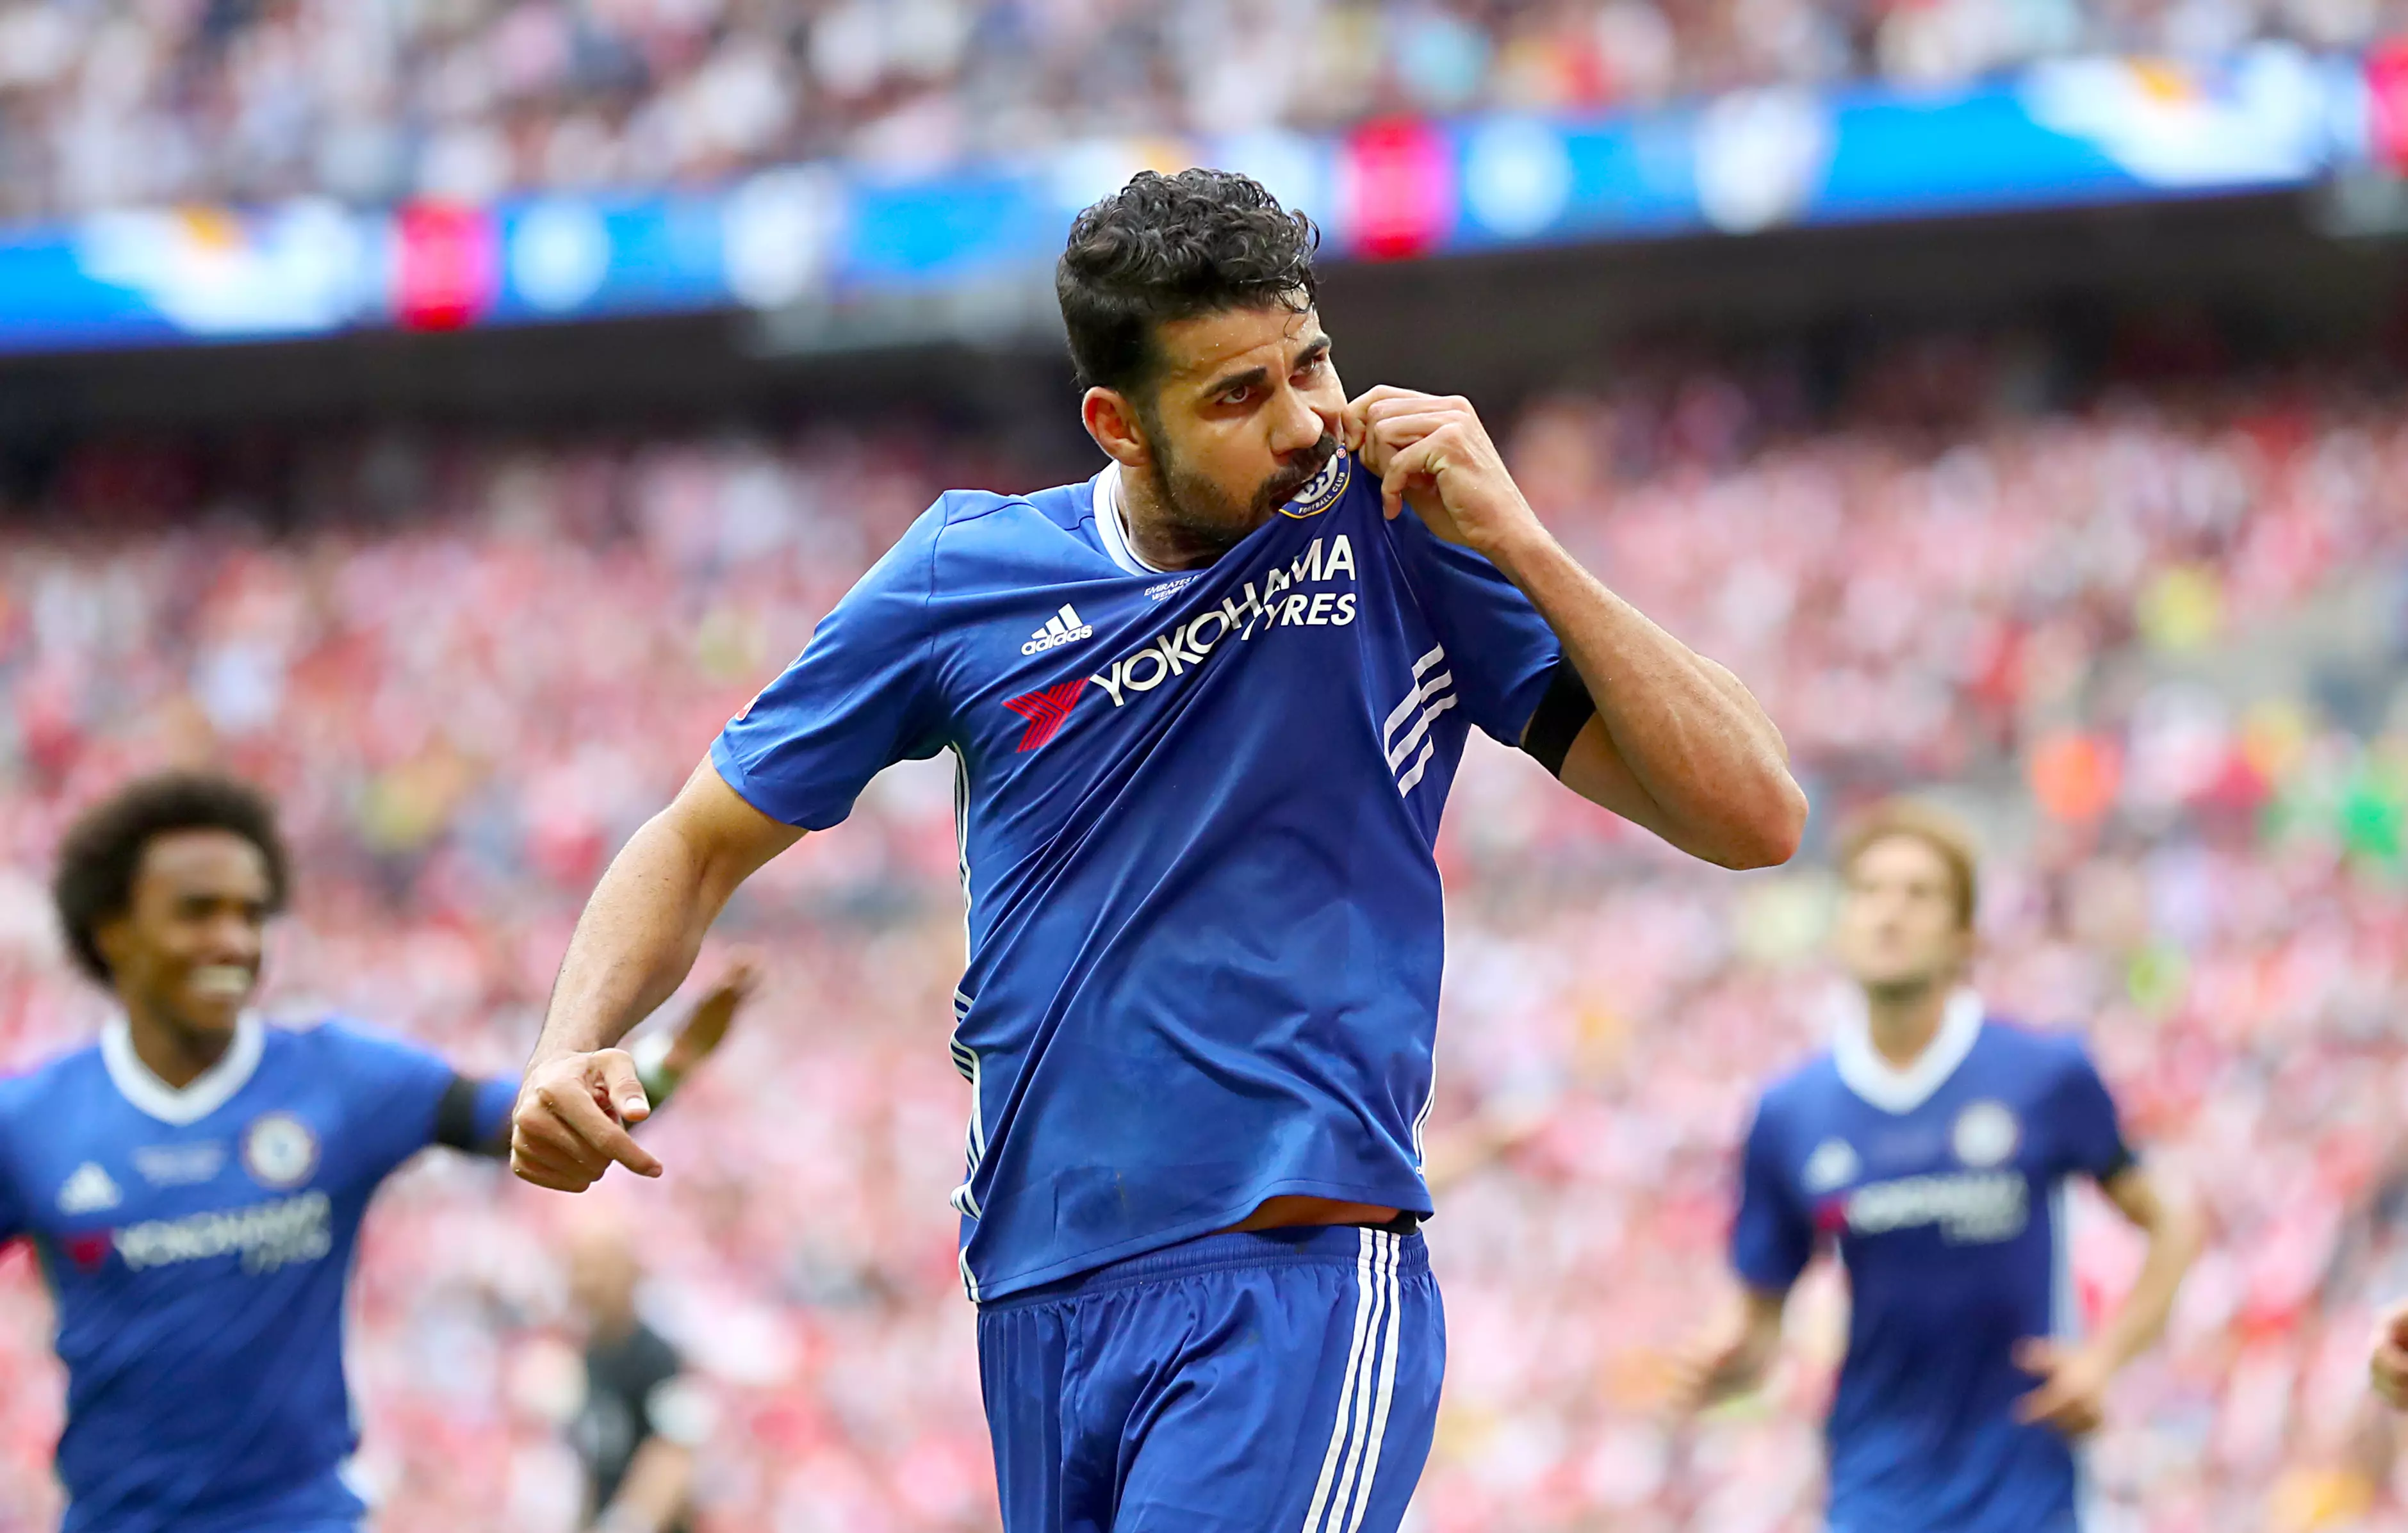 Costa in happier times at Stamford Bridge. Image: PA Images